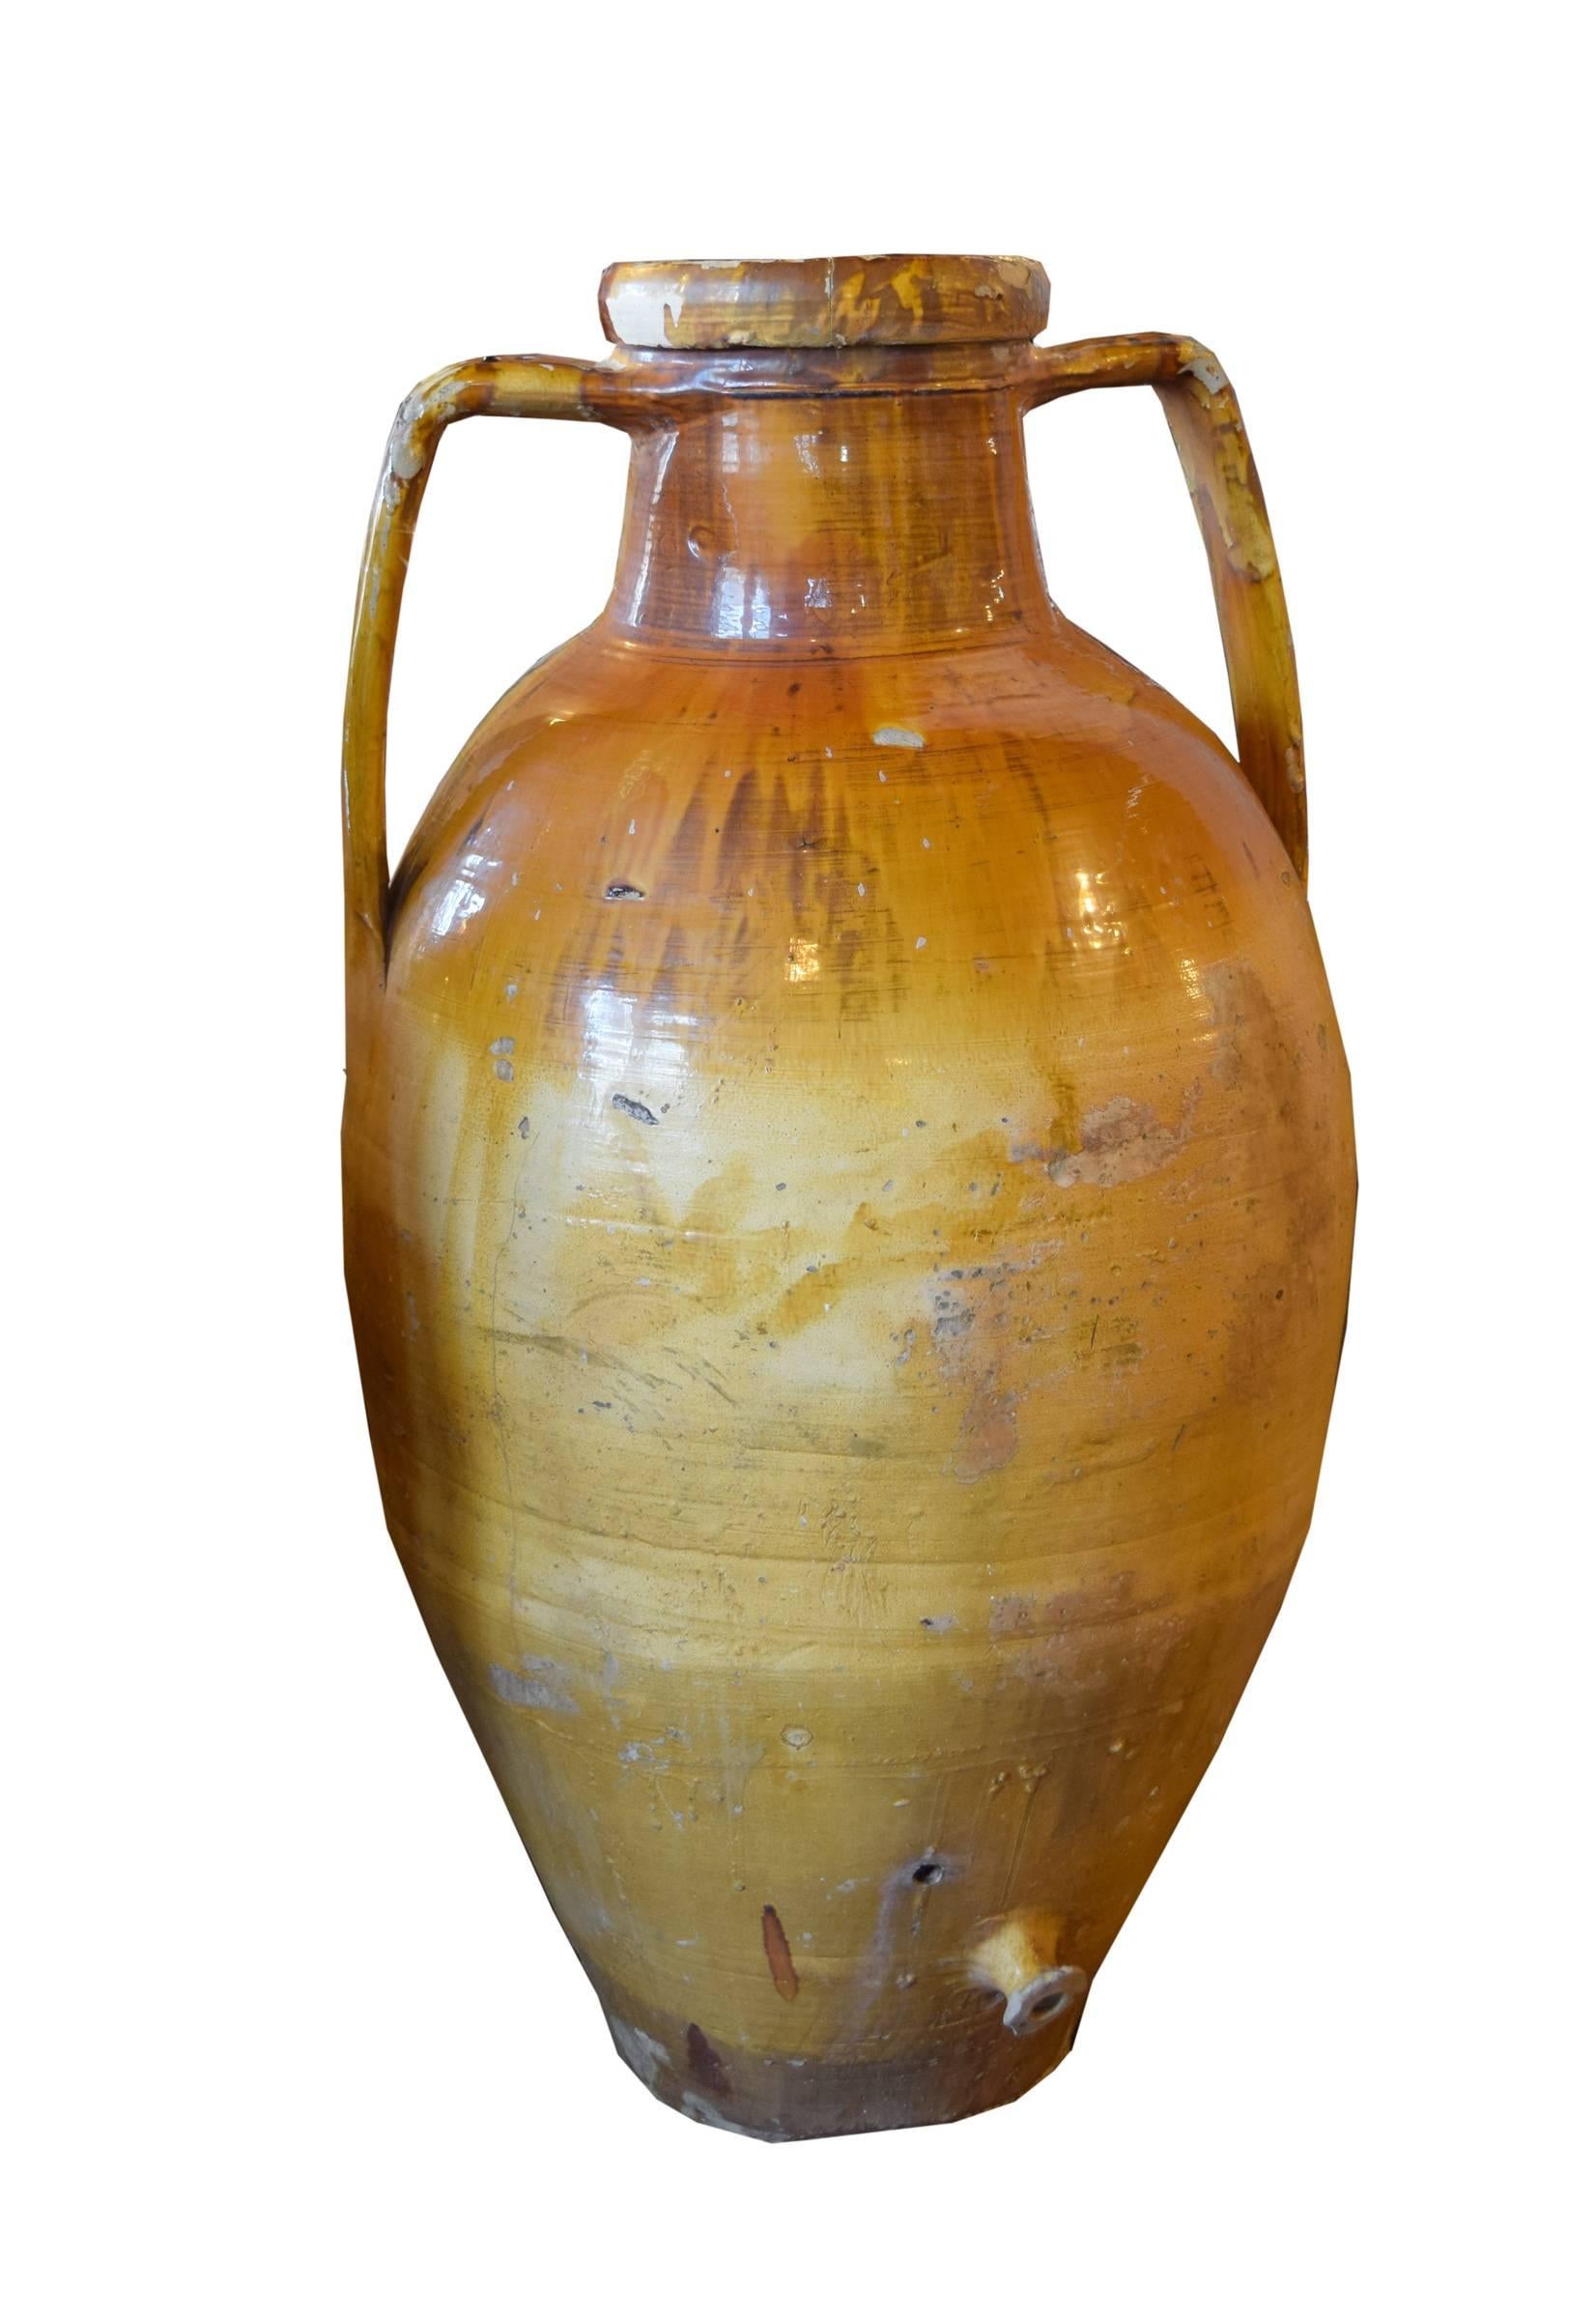 A 19th century Italian terracotta amphora form olive oil vessel with a beautiful glaze and a spout at the bottom.
